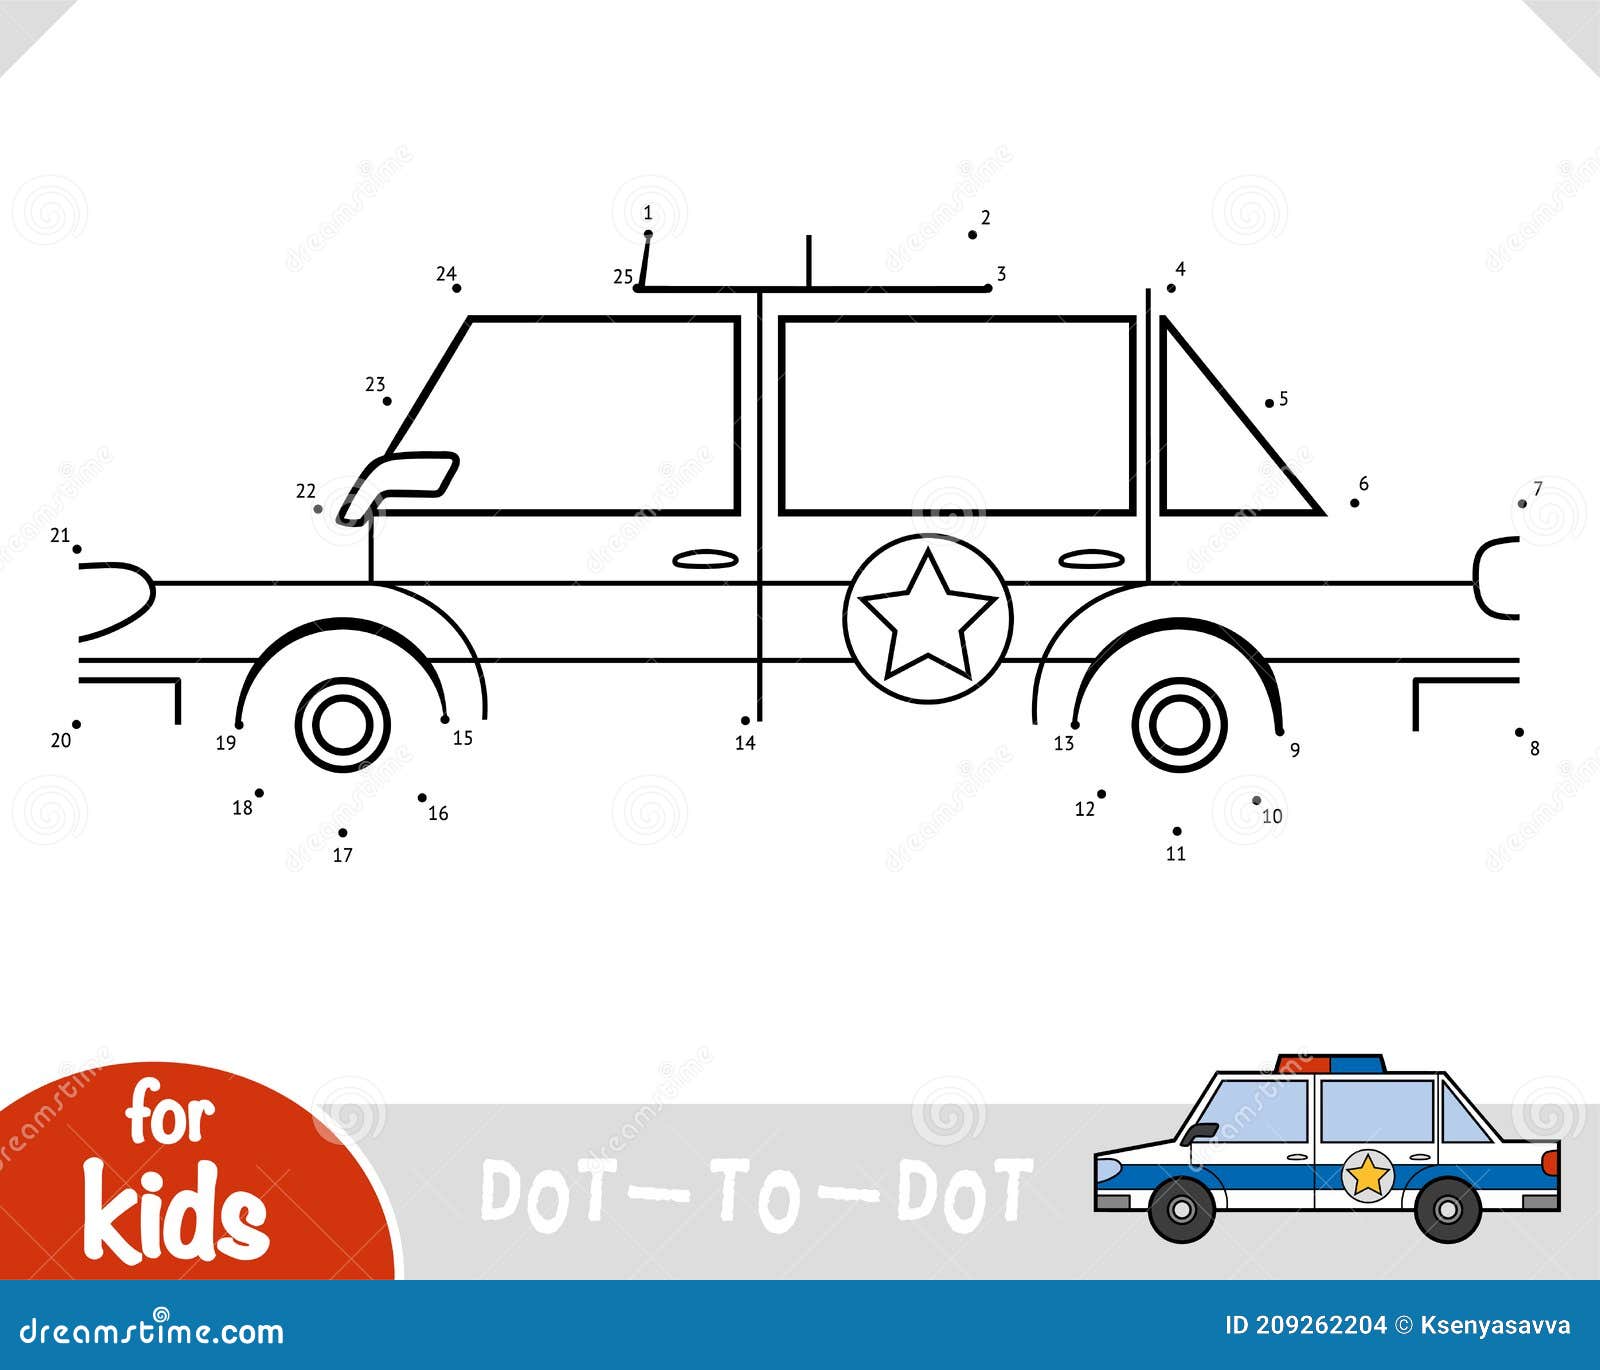 numbers-game-education-dot-to-dot-game-police-car-stock-vector